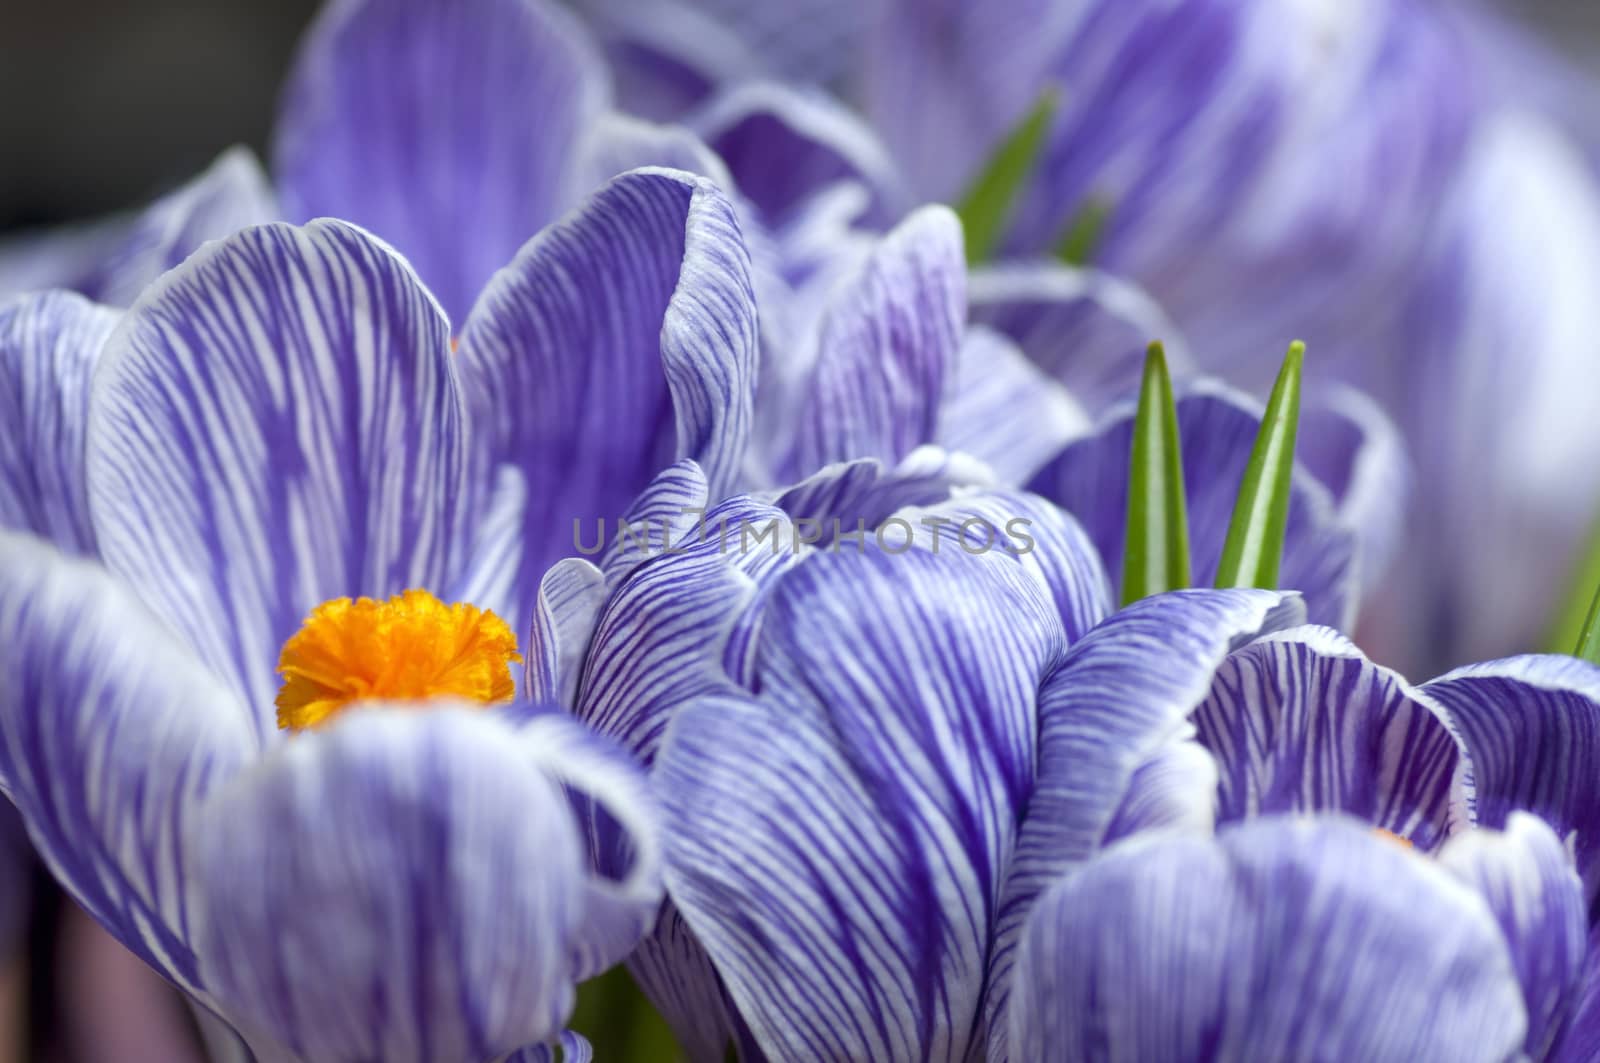 Blossoming crocuses by dred